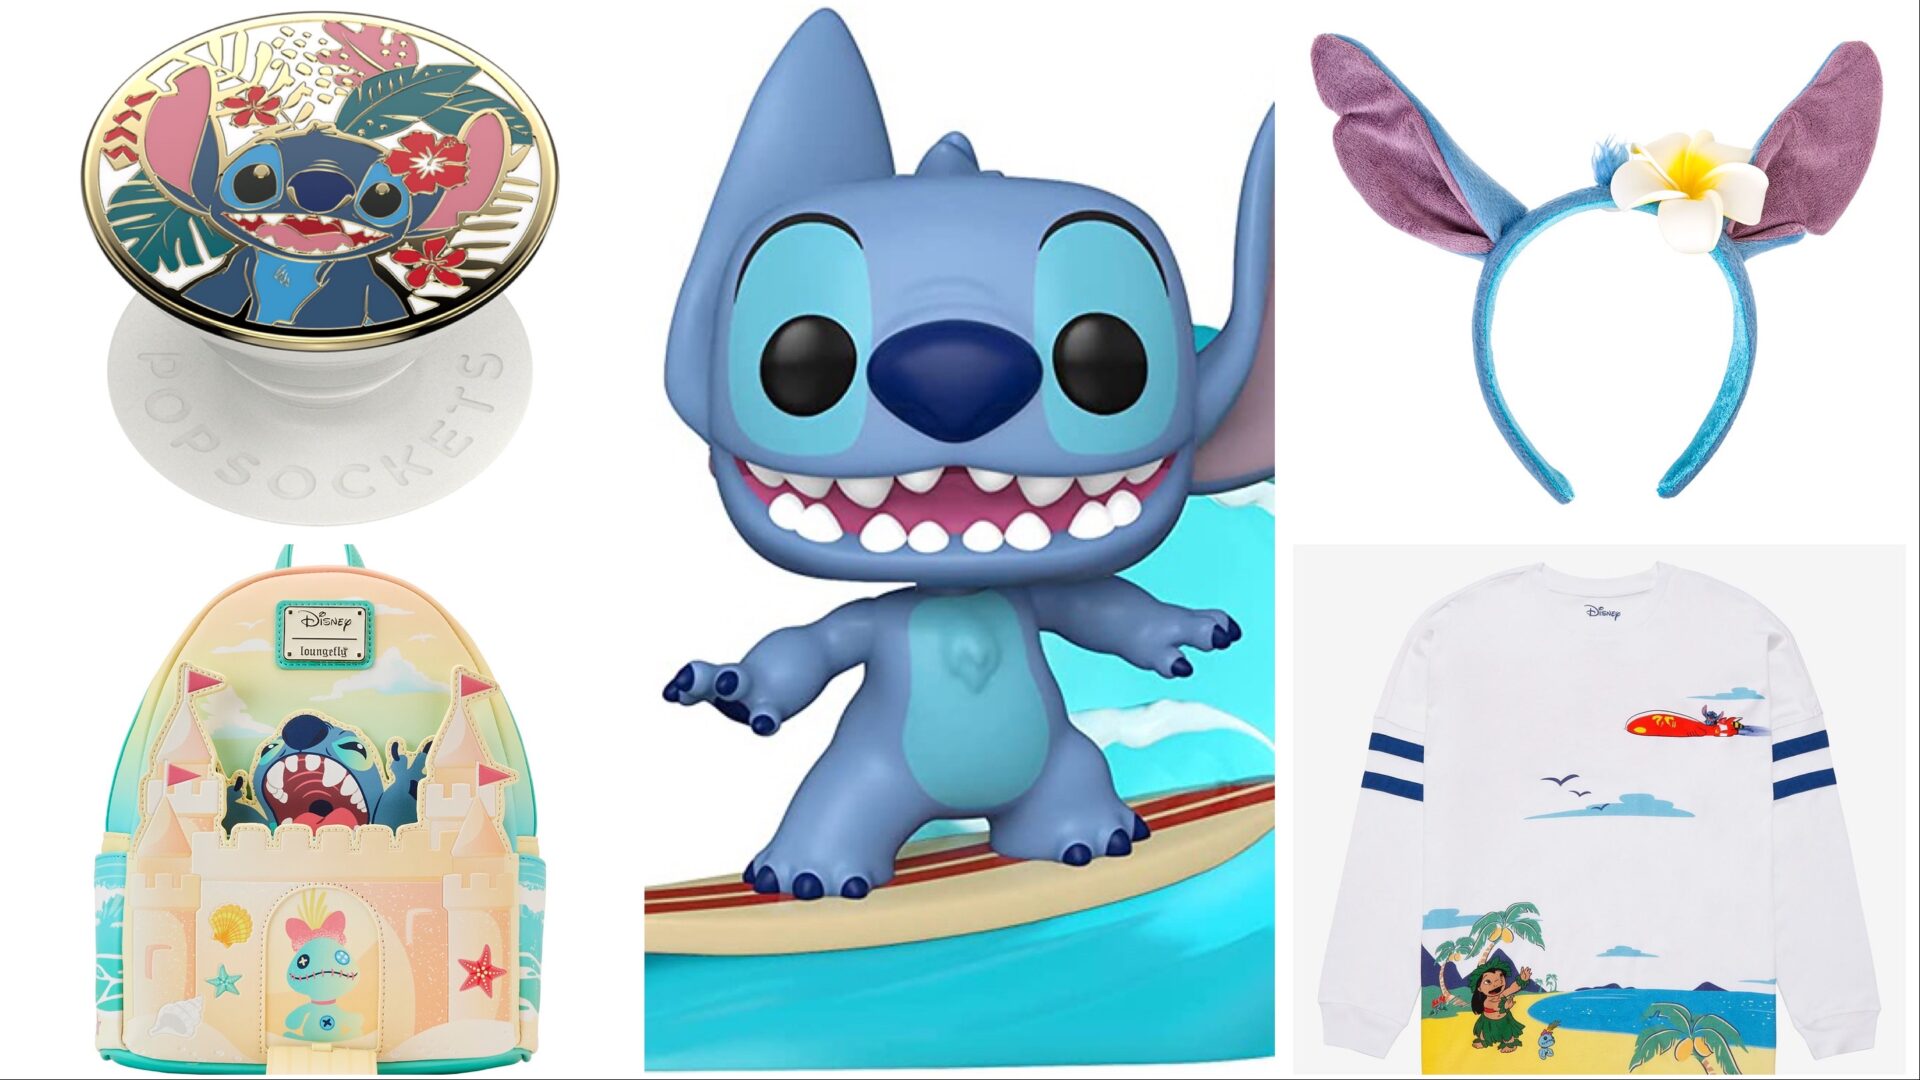 Celebrate 626 Day With These New Stitch Products!